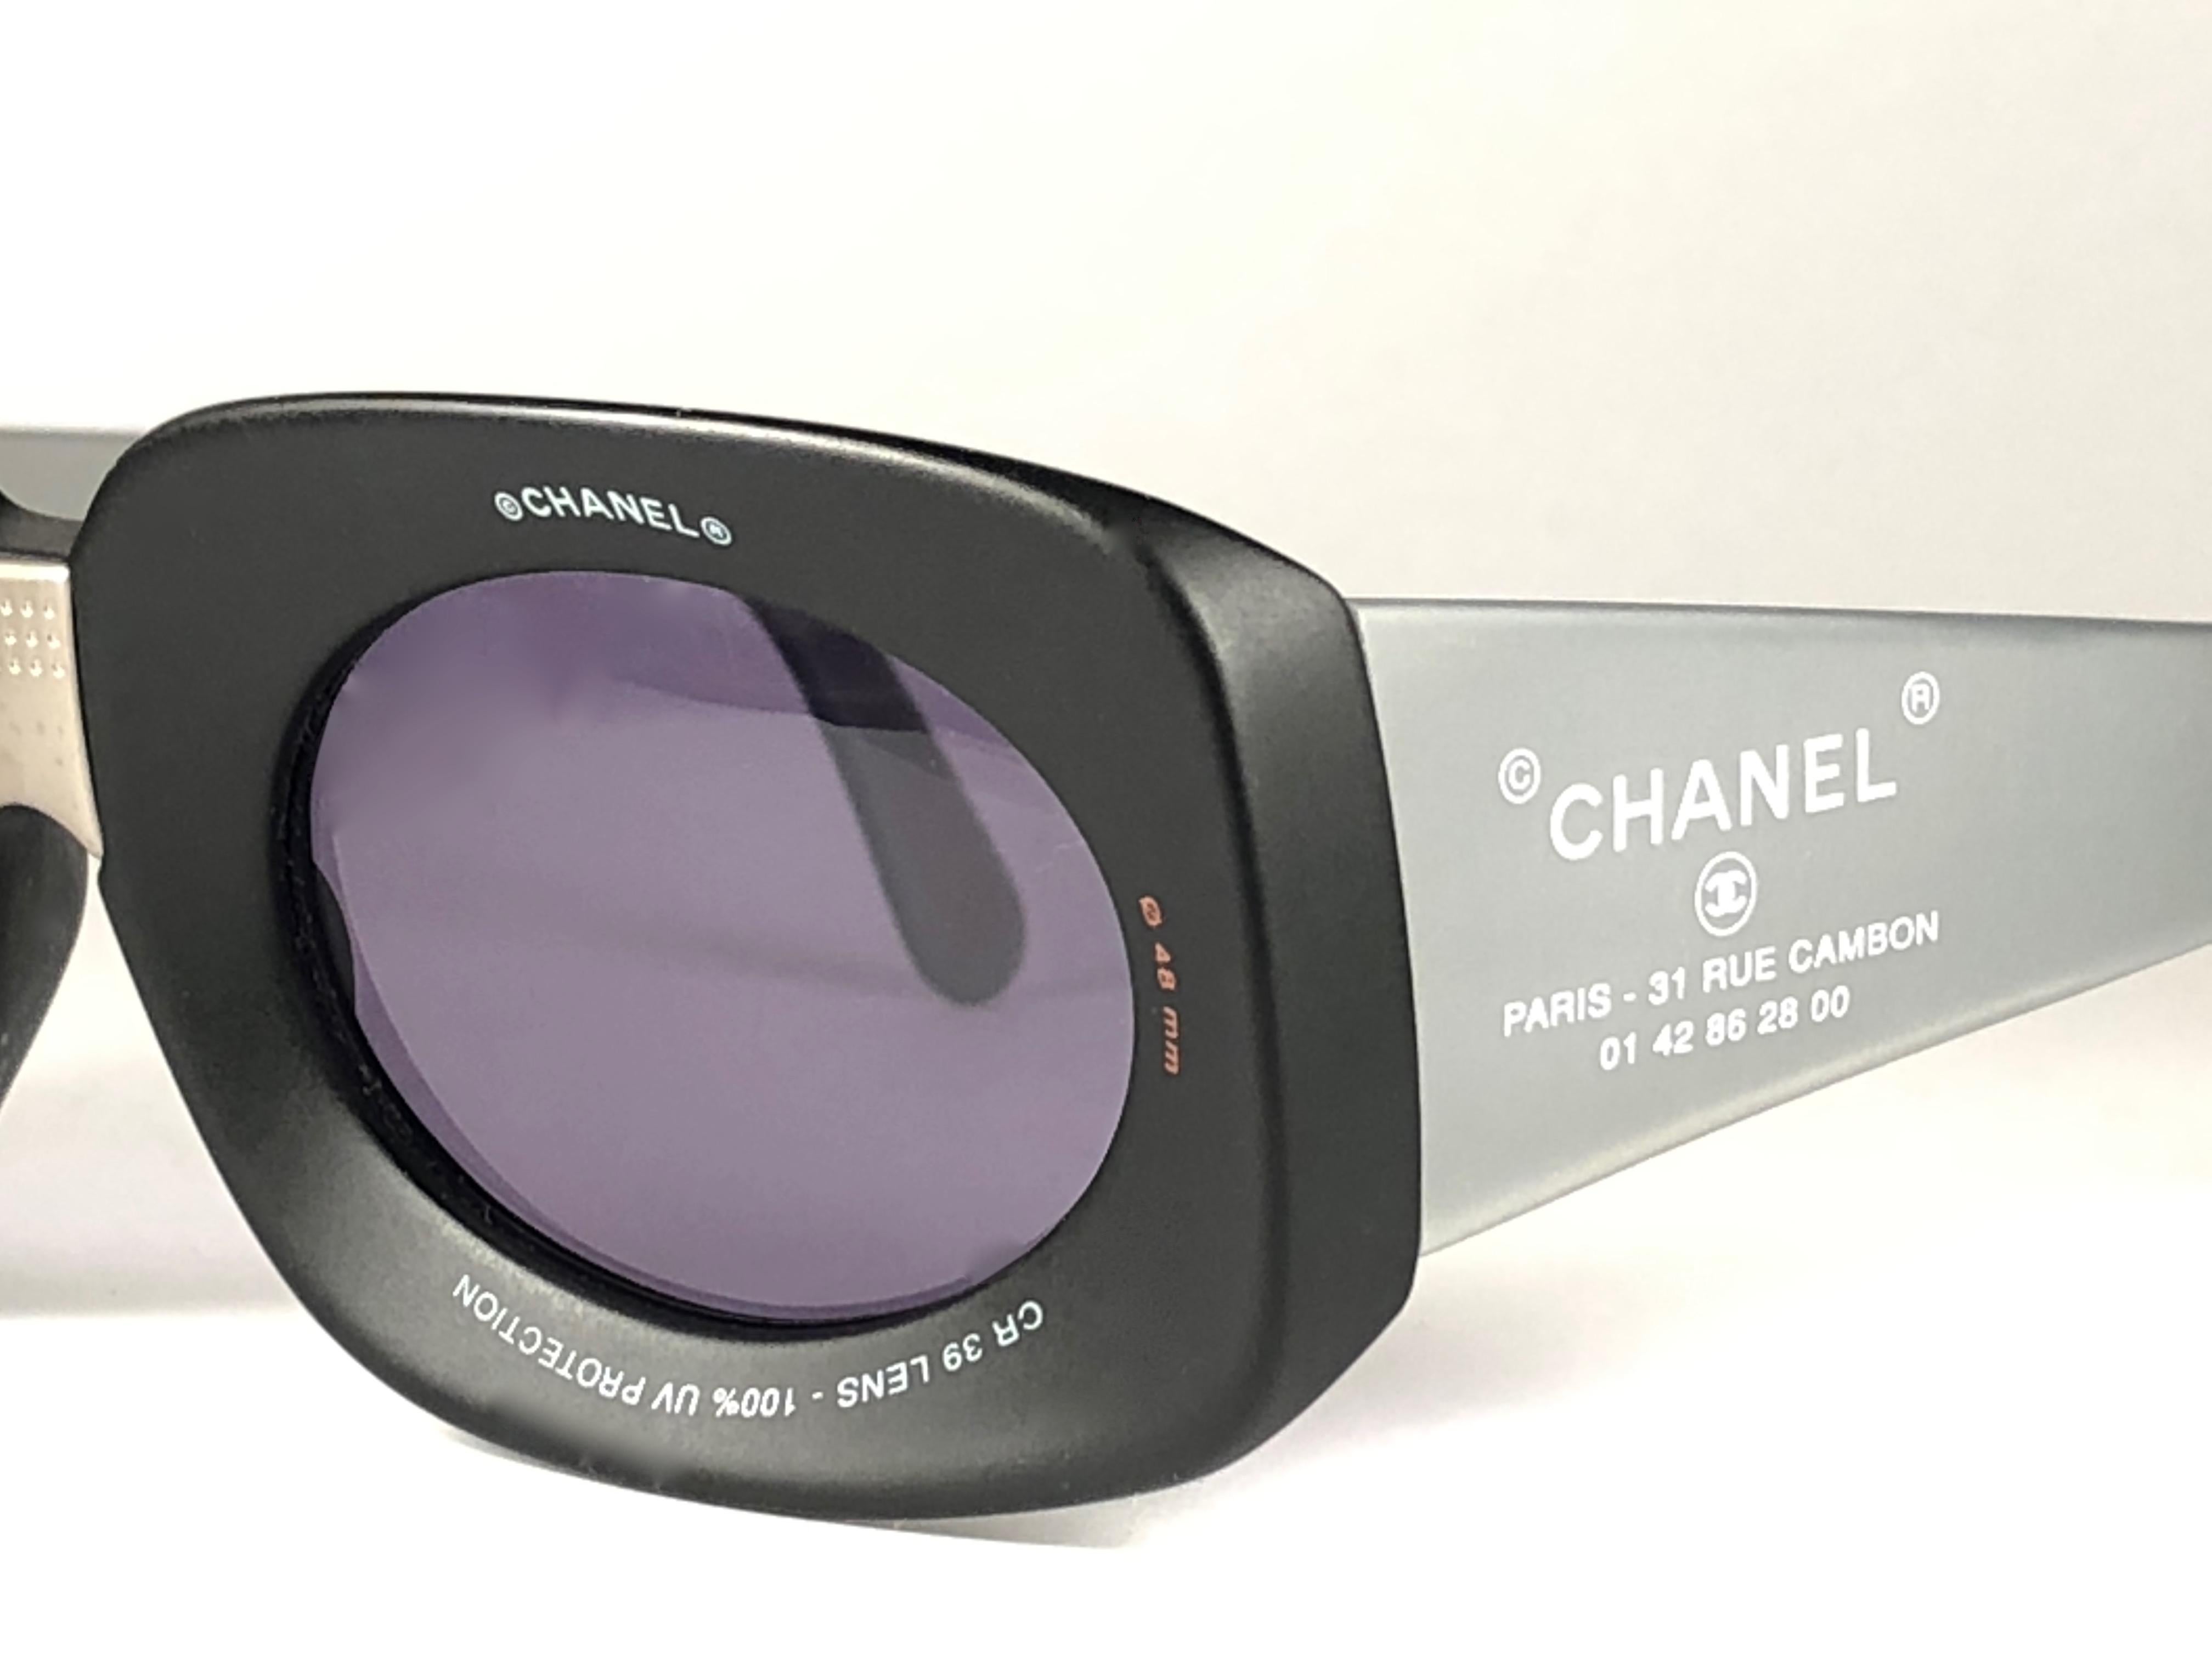 Chanel Vintage Camera Lens Black & Grey Sunglasses Made in Italy Collector Item 2